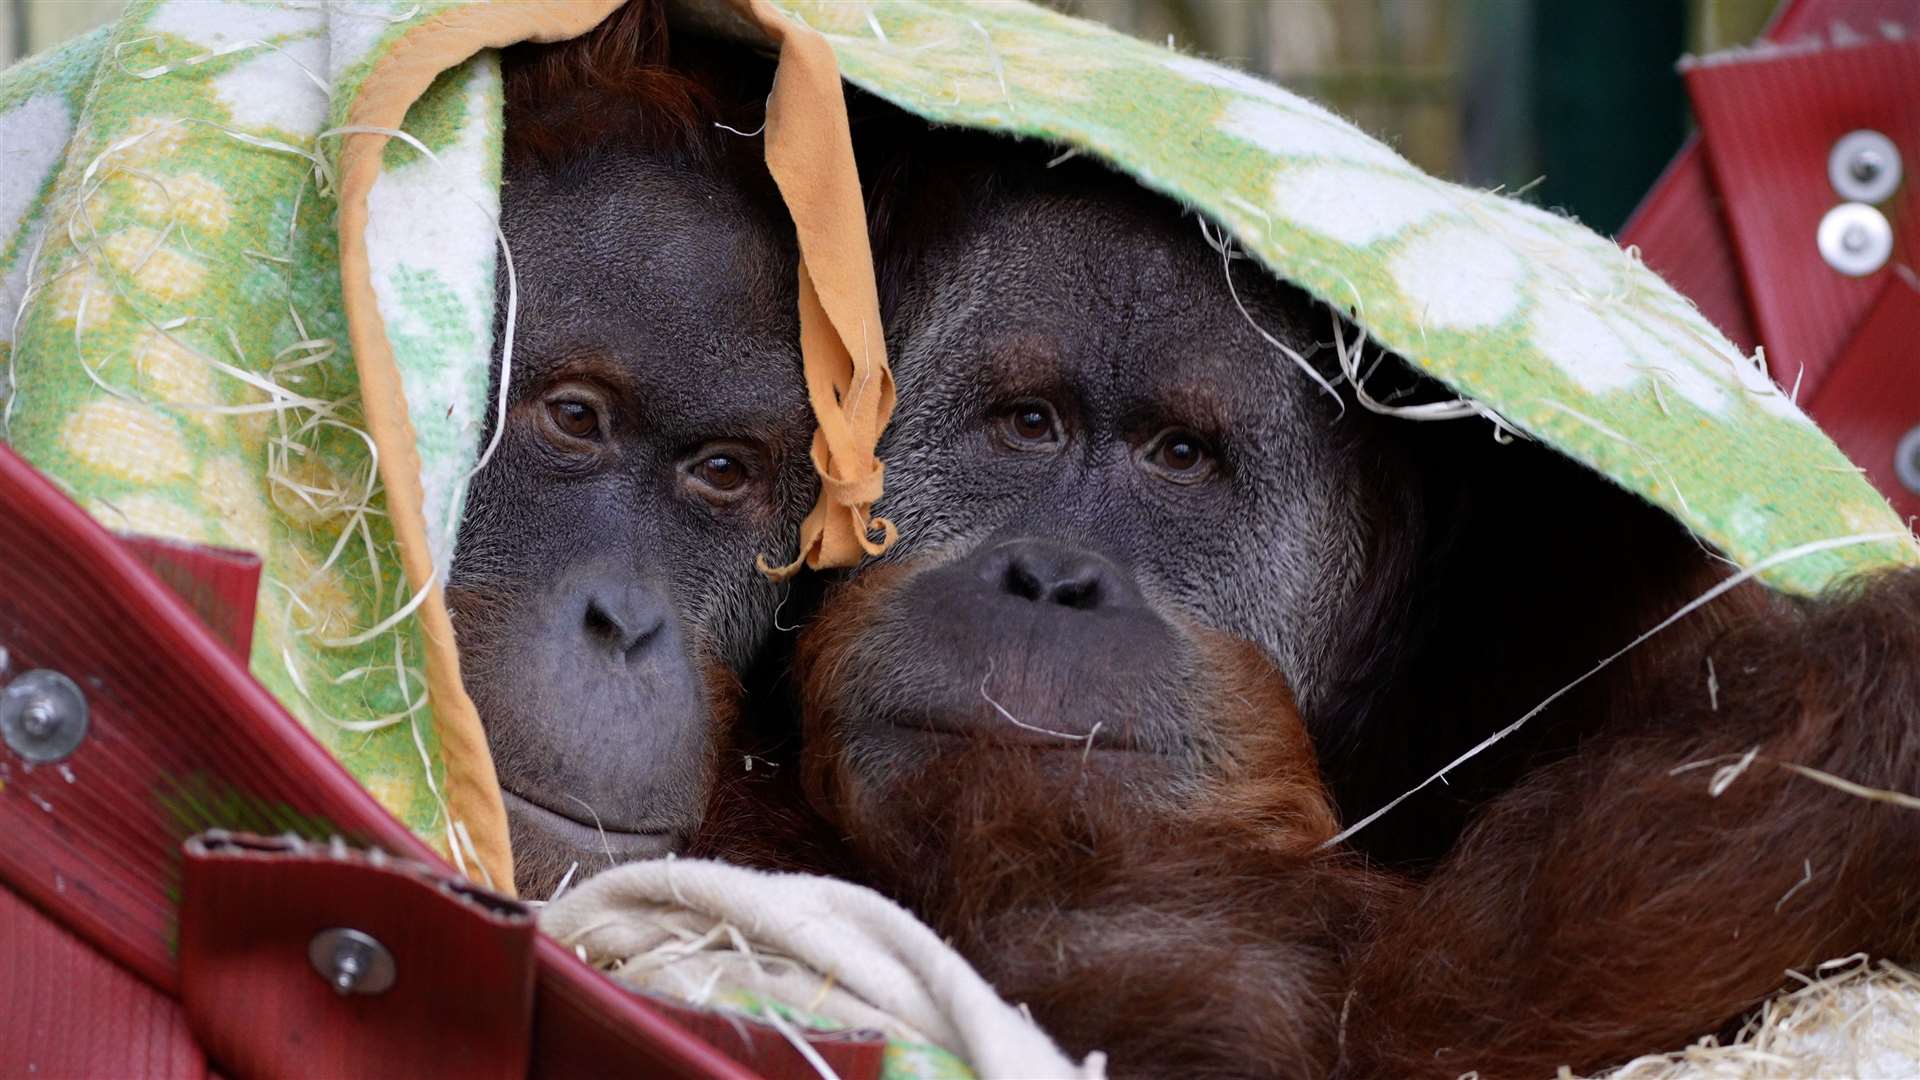 Two critically endangered Sumatran orangutans, Hadjah and Malou, arrived at Port Lympne earlier this month. Picture: Aspinall Foundation